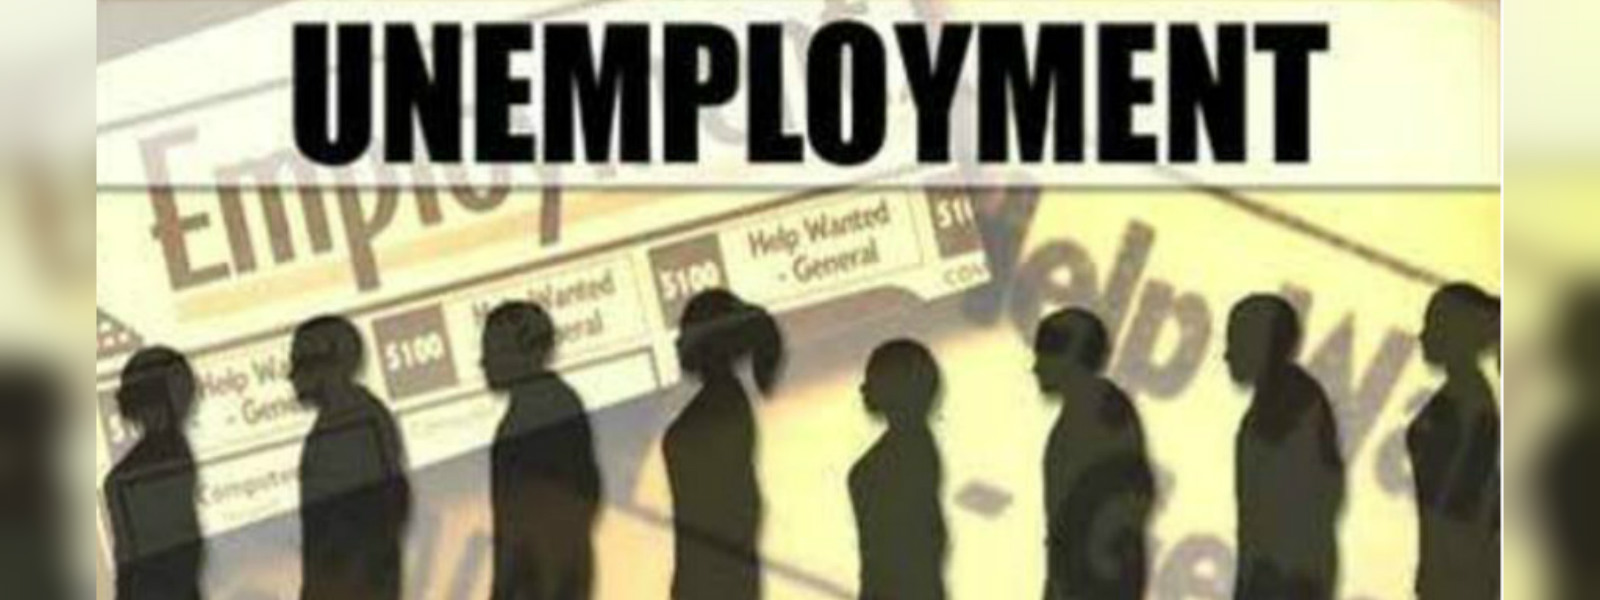 4130 unemployed graduates to receive appointments 